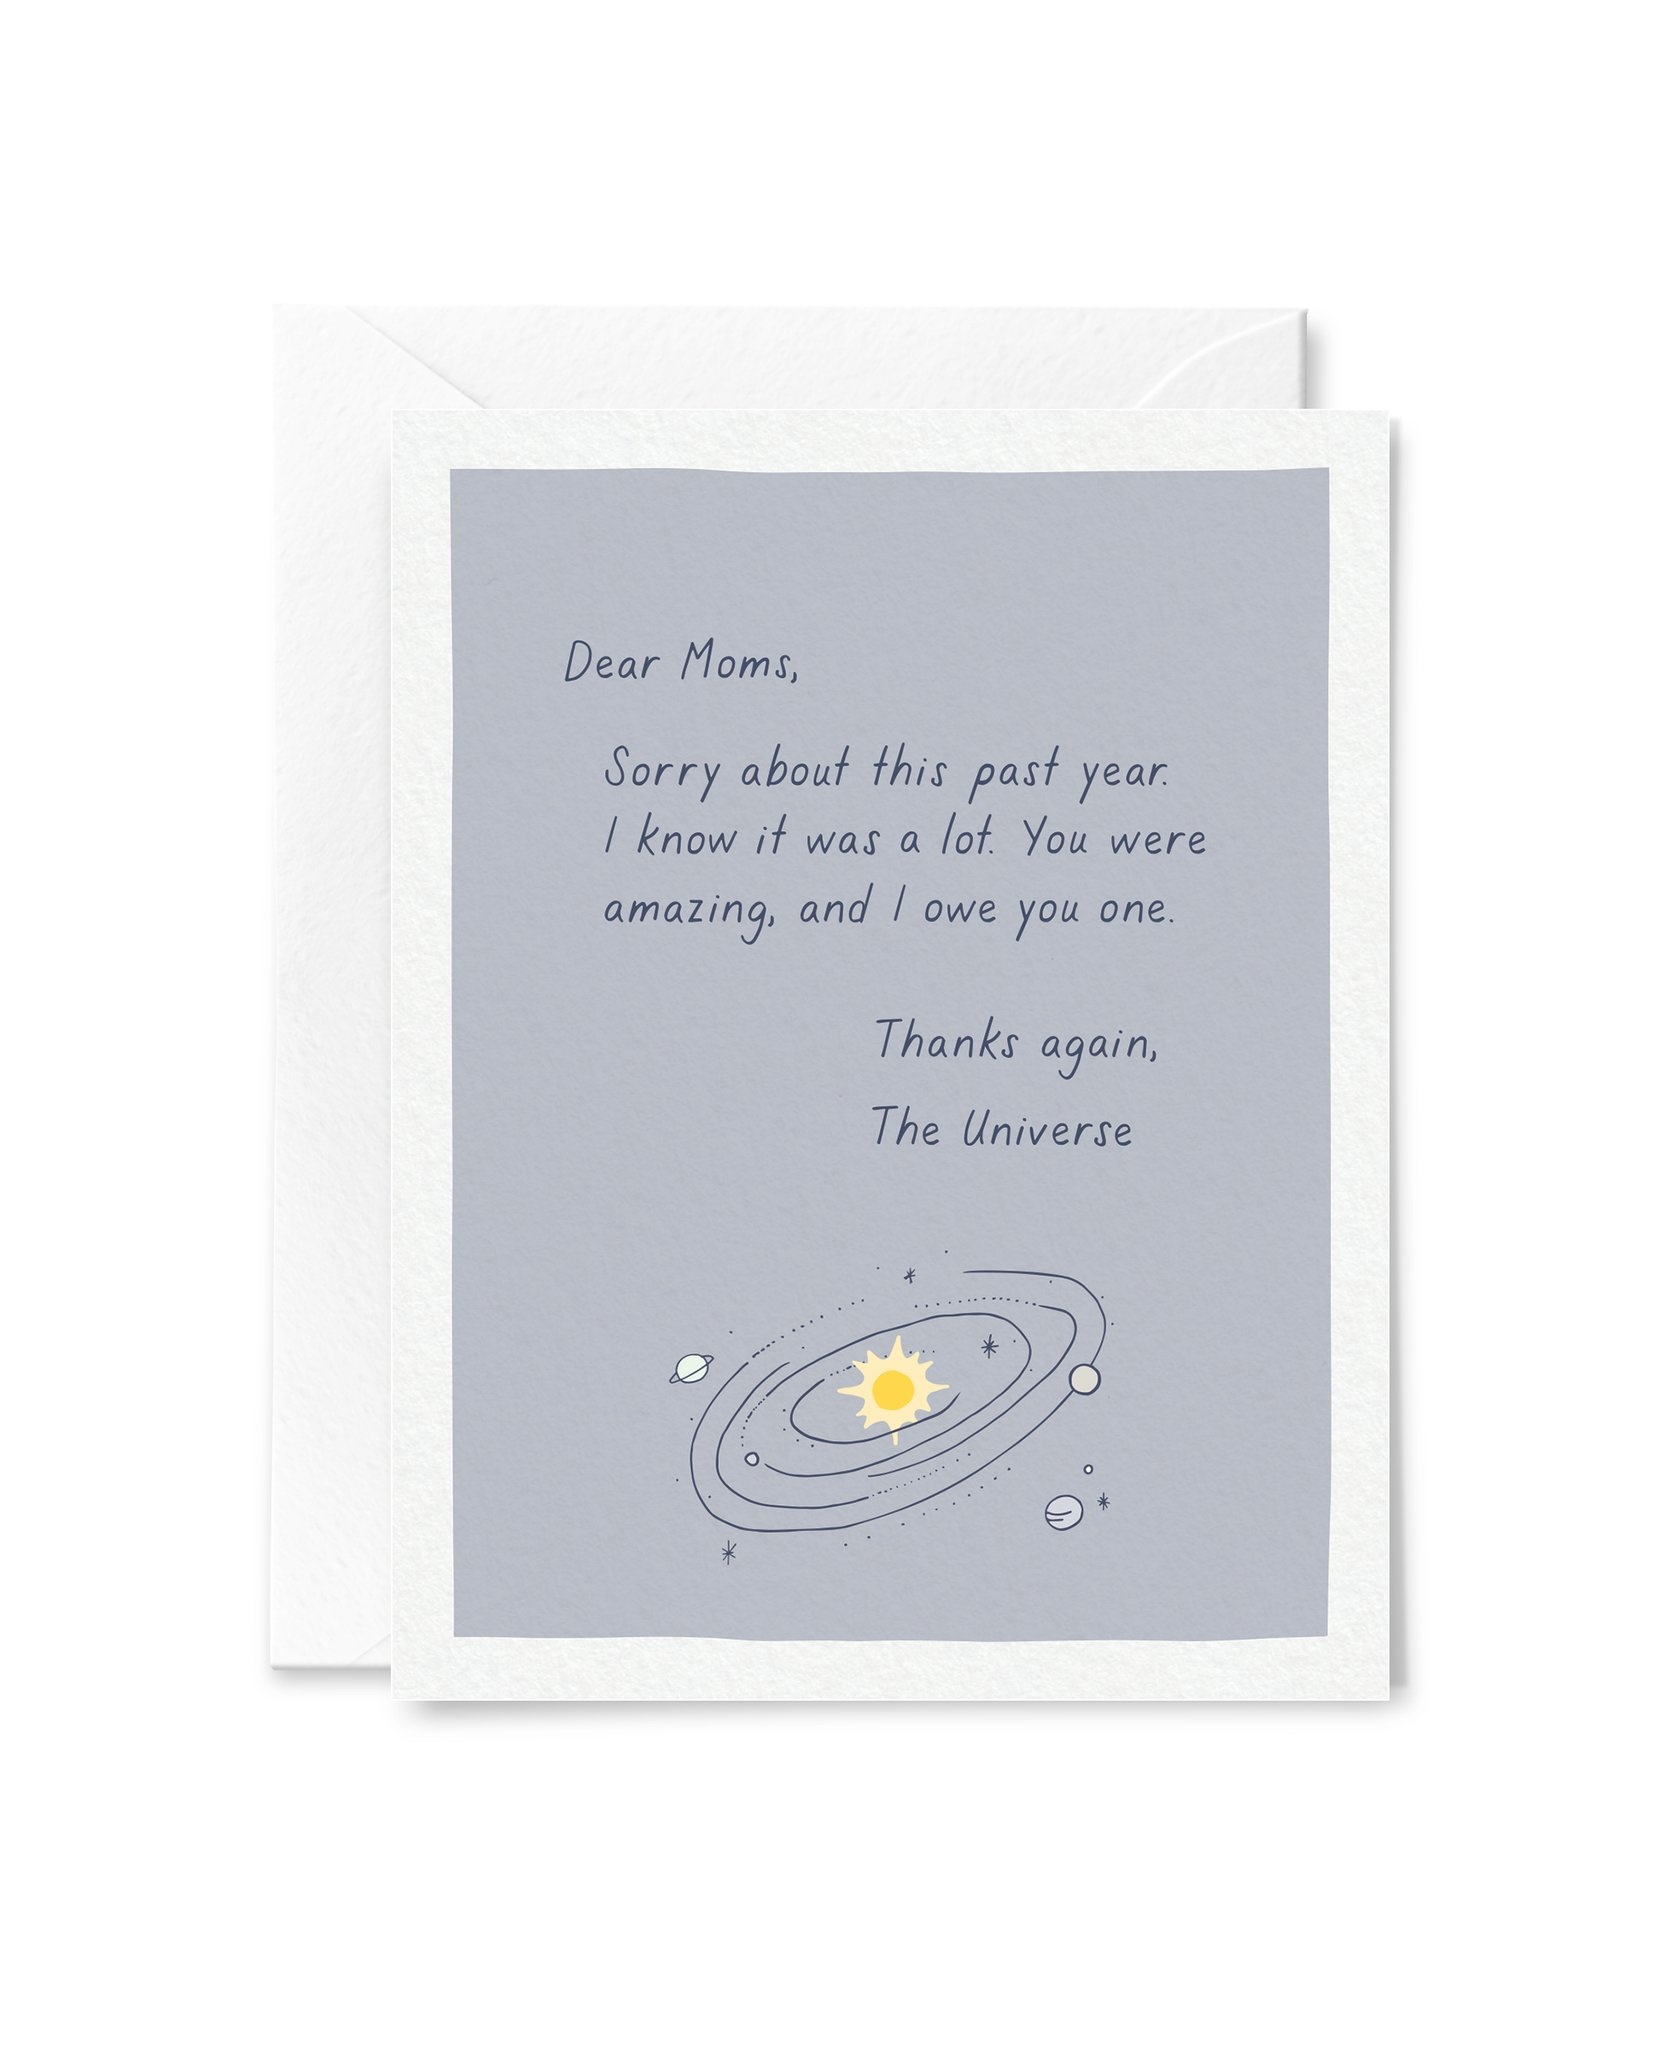 Tiny Hooray - TIH (formerly Little Goat, LG) Dear Moms Quarantine Mother's Day Card